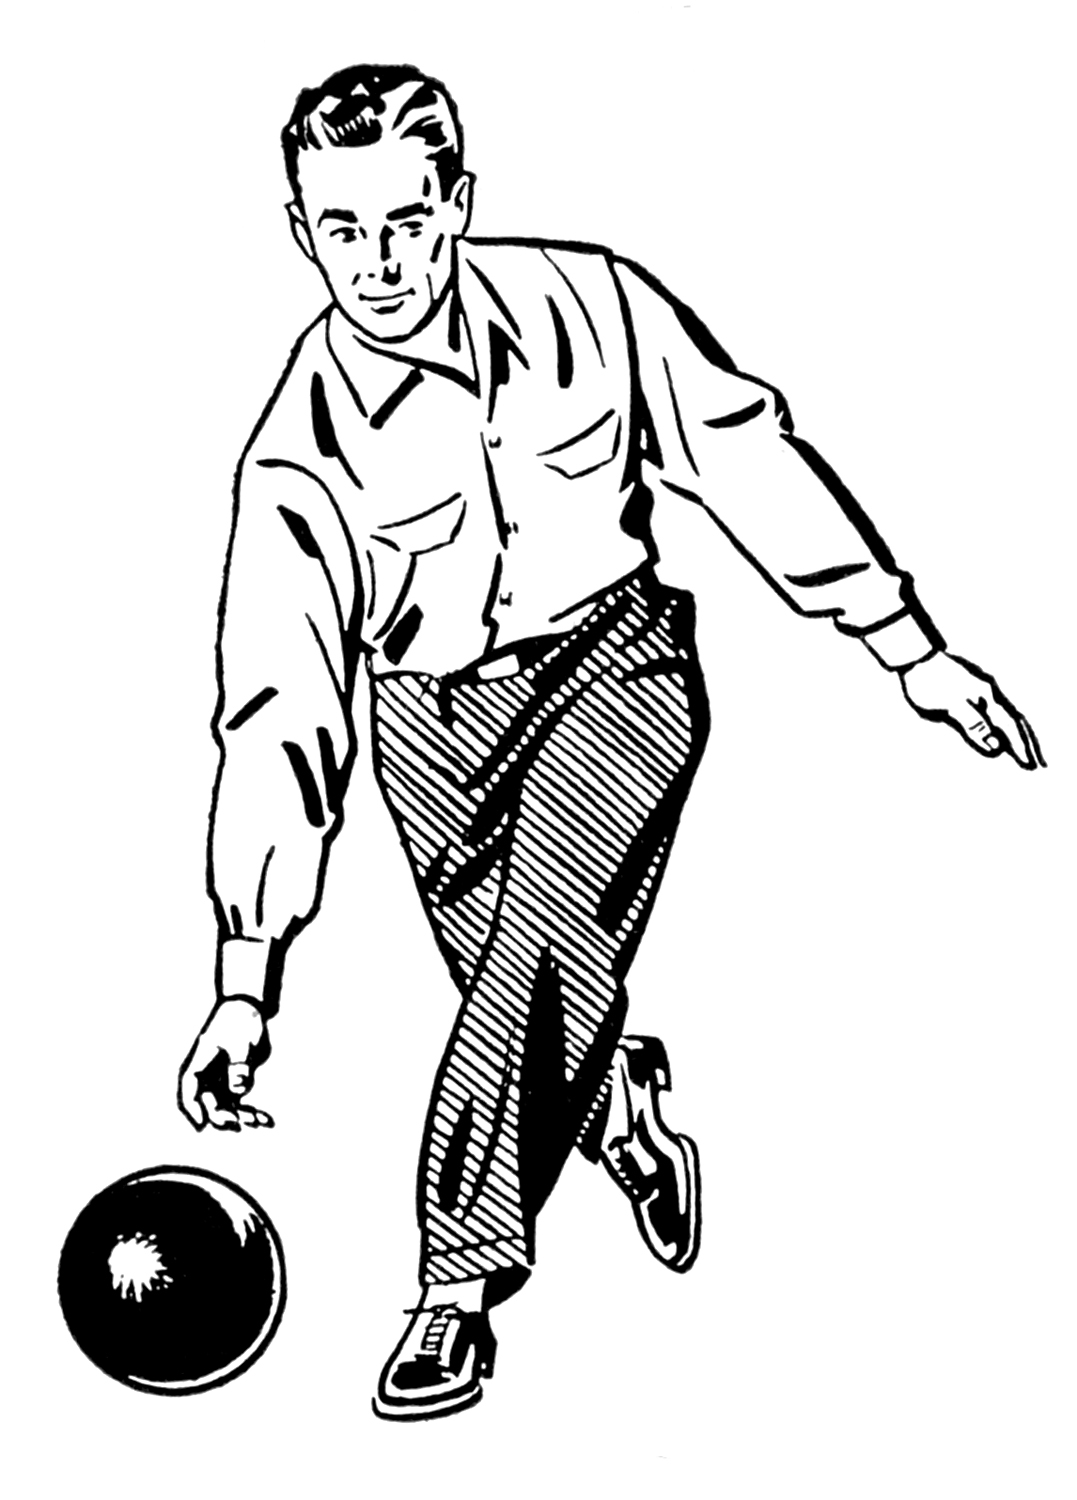 Retro Clip Art - Woman and Man Bowling - The Graphics Fairy